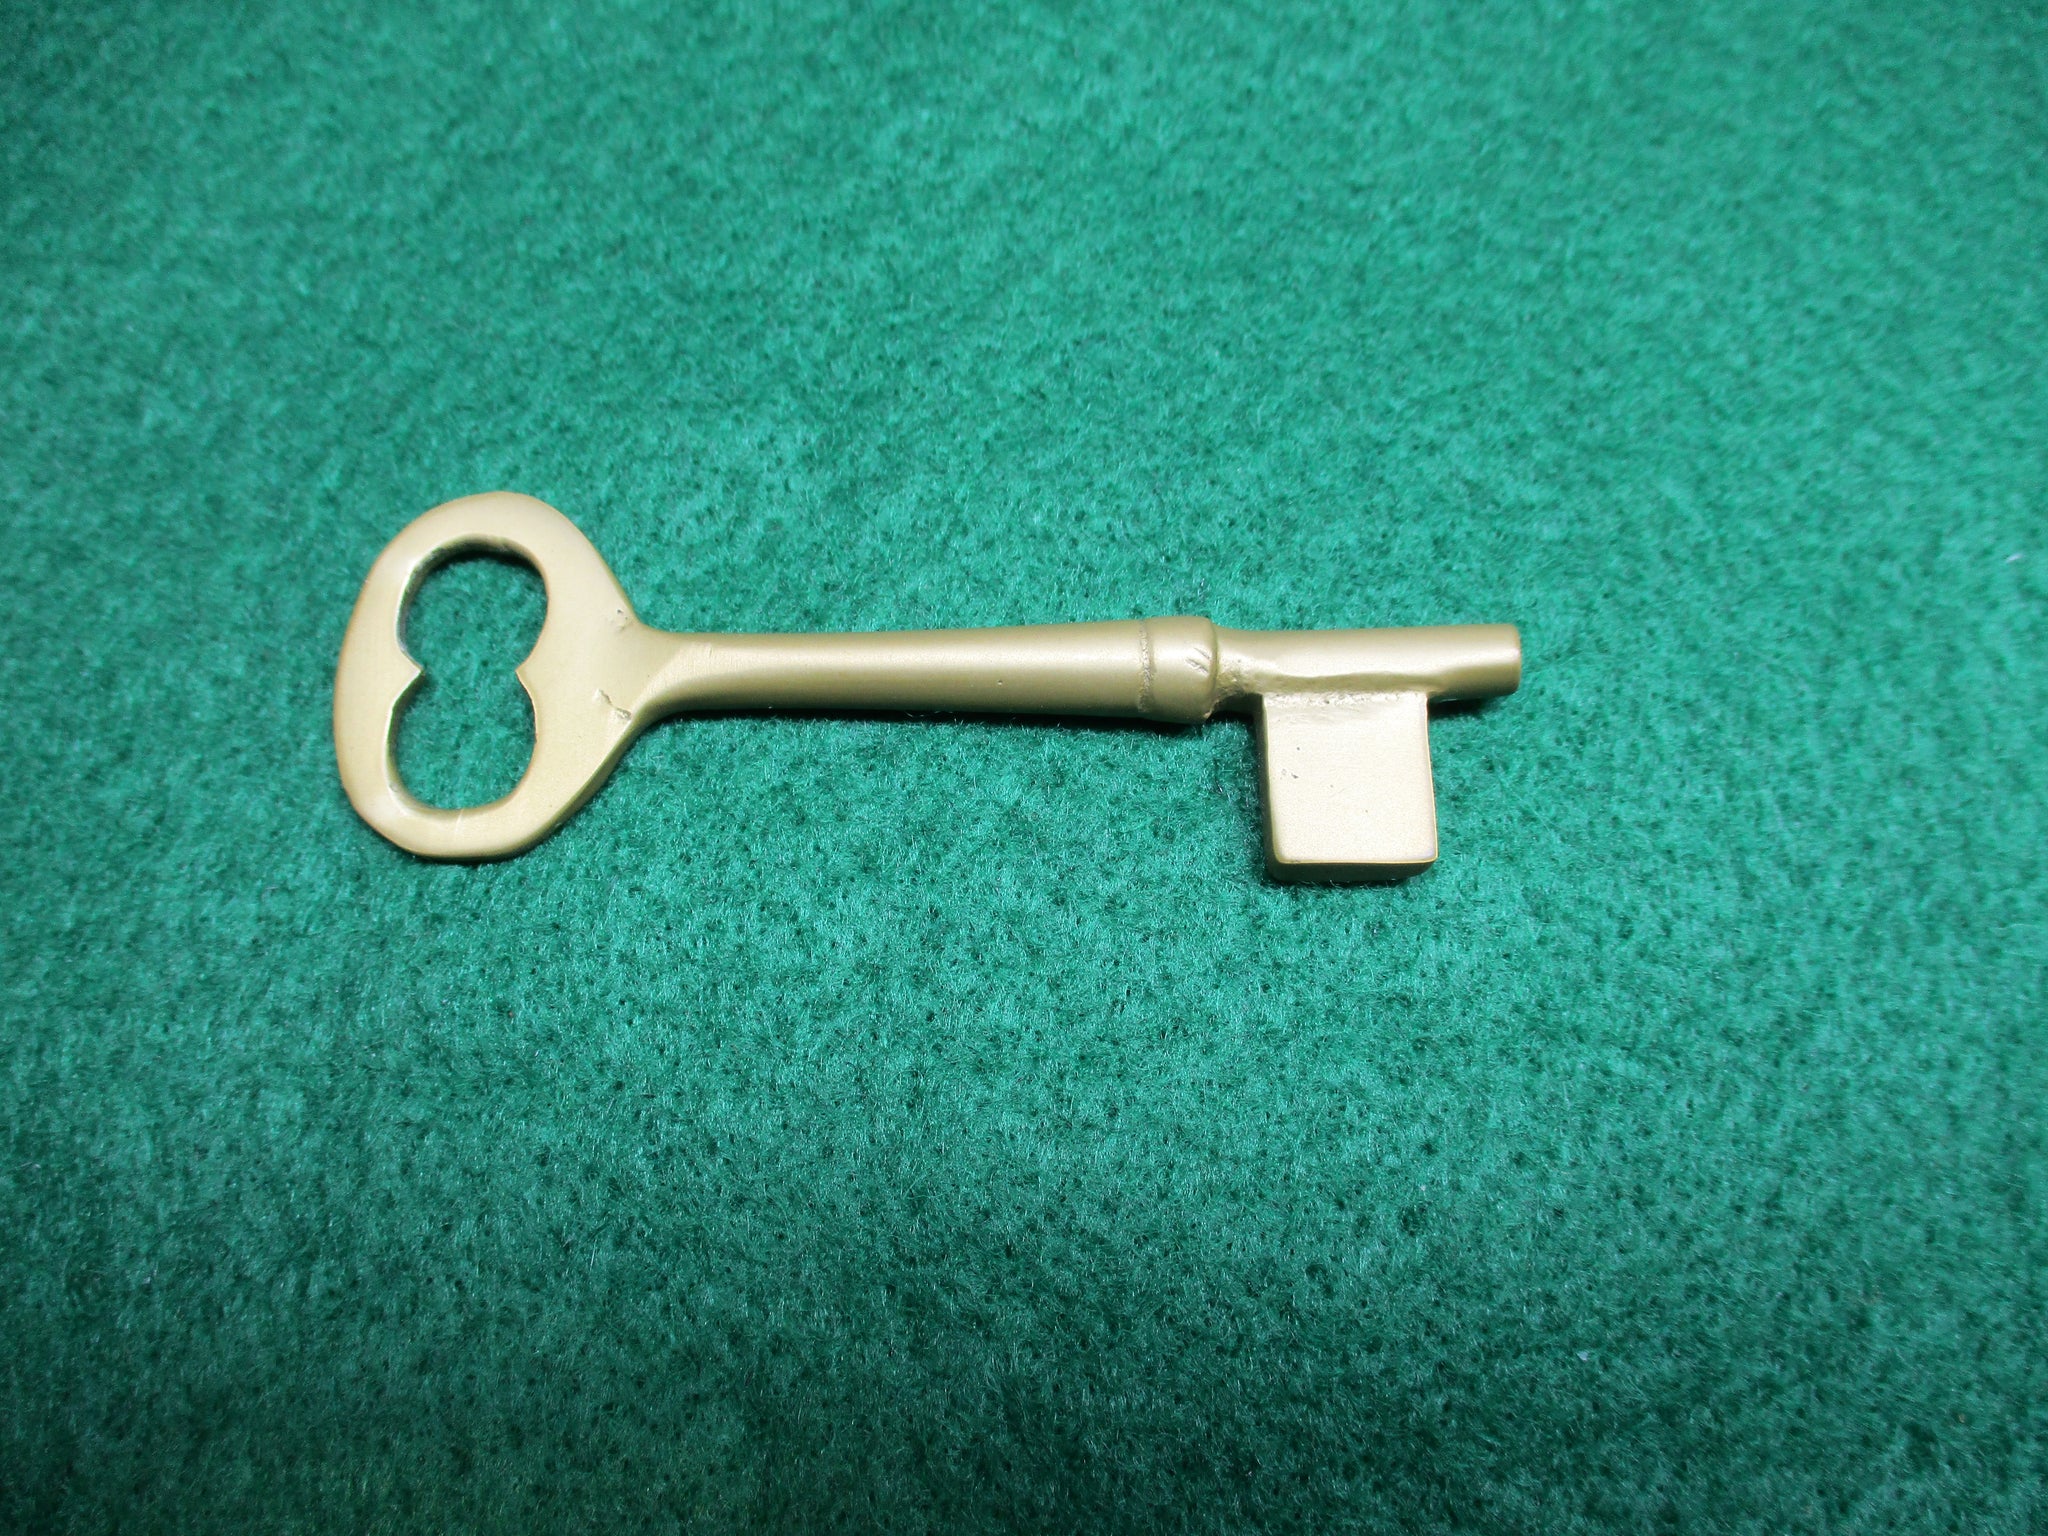 2 5/8" BRASS BIT KEY BLANK with TAPERED END - PERFECT for OLD LOCKS (33227)